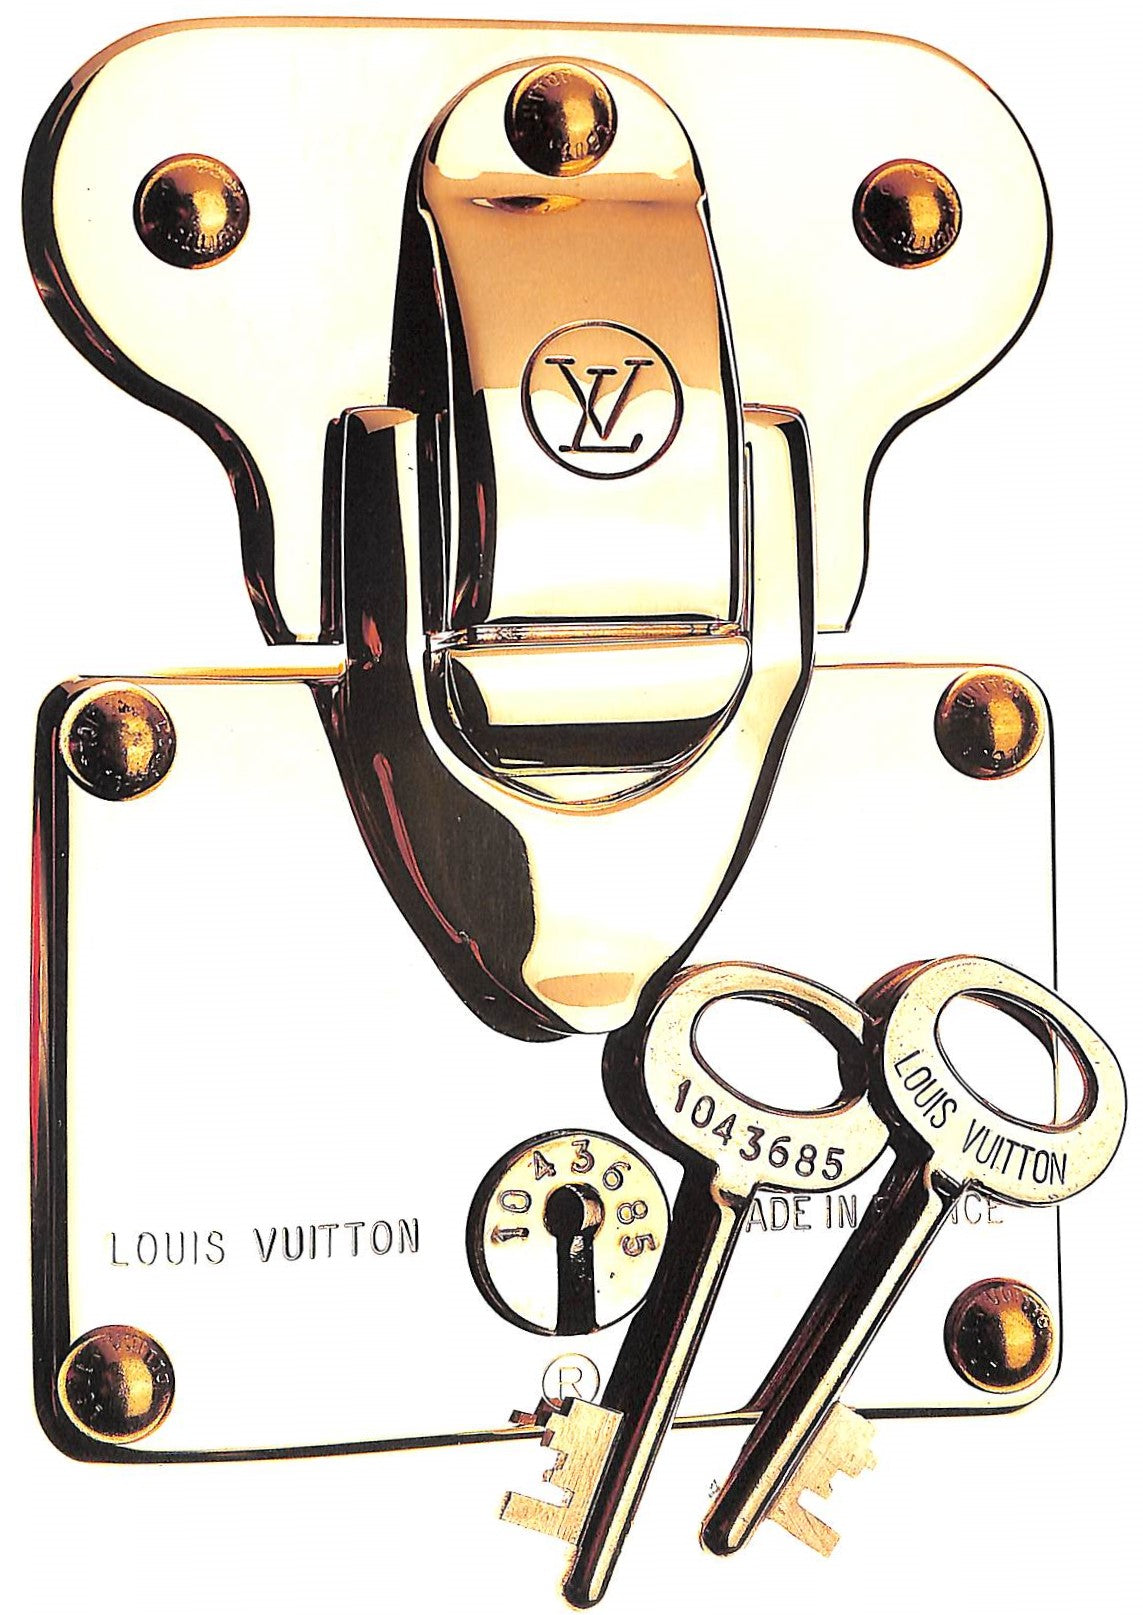 LOUIS VUITTON The Birth of Modern Luxury by Paul-Gerard Pasols - Collecting  Louis Vuitton 